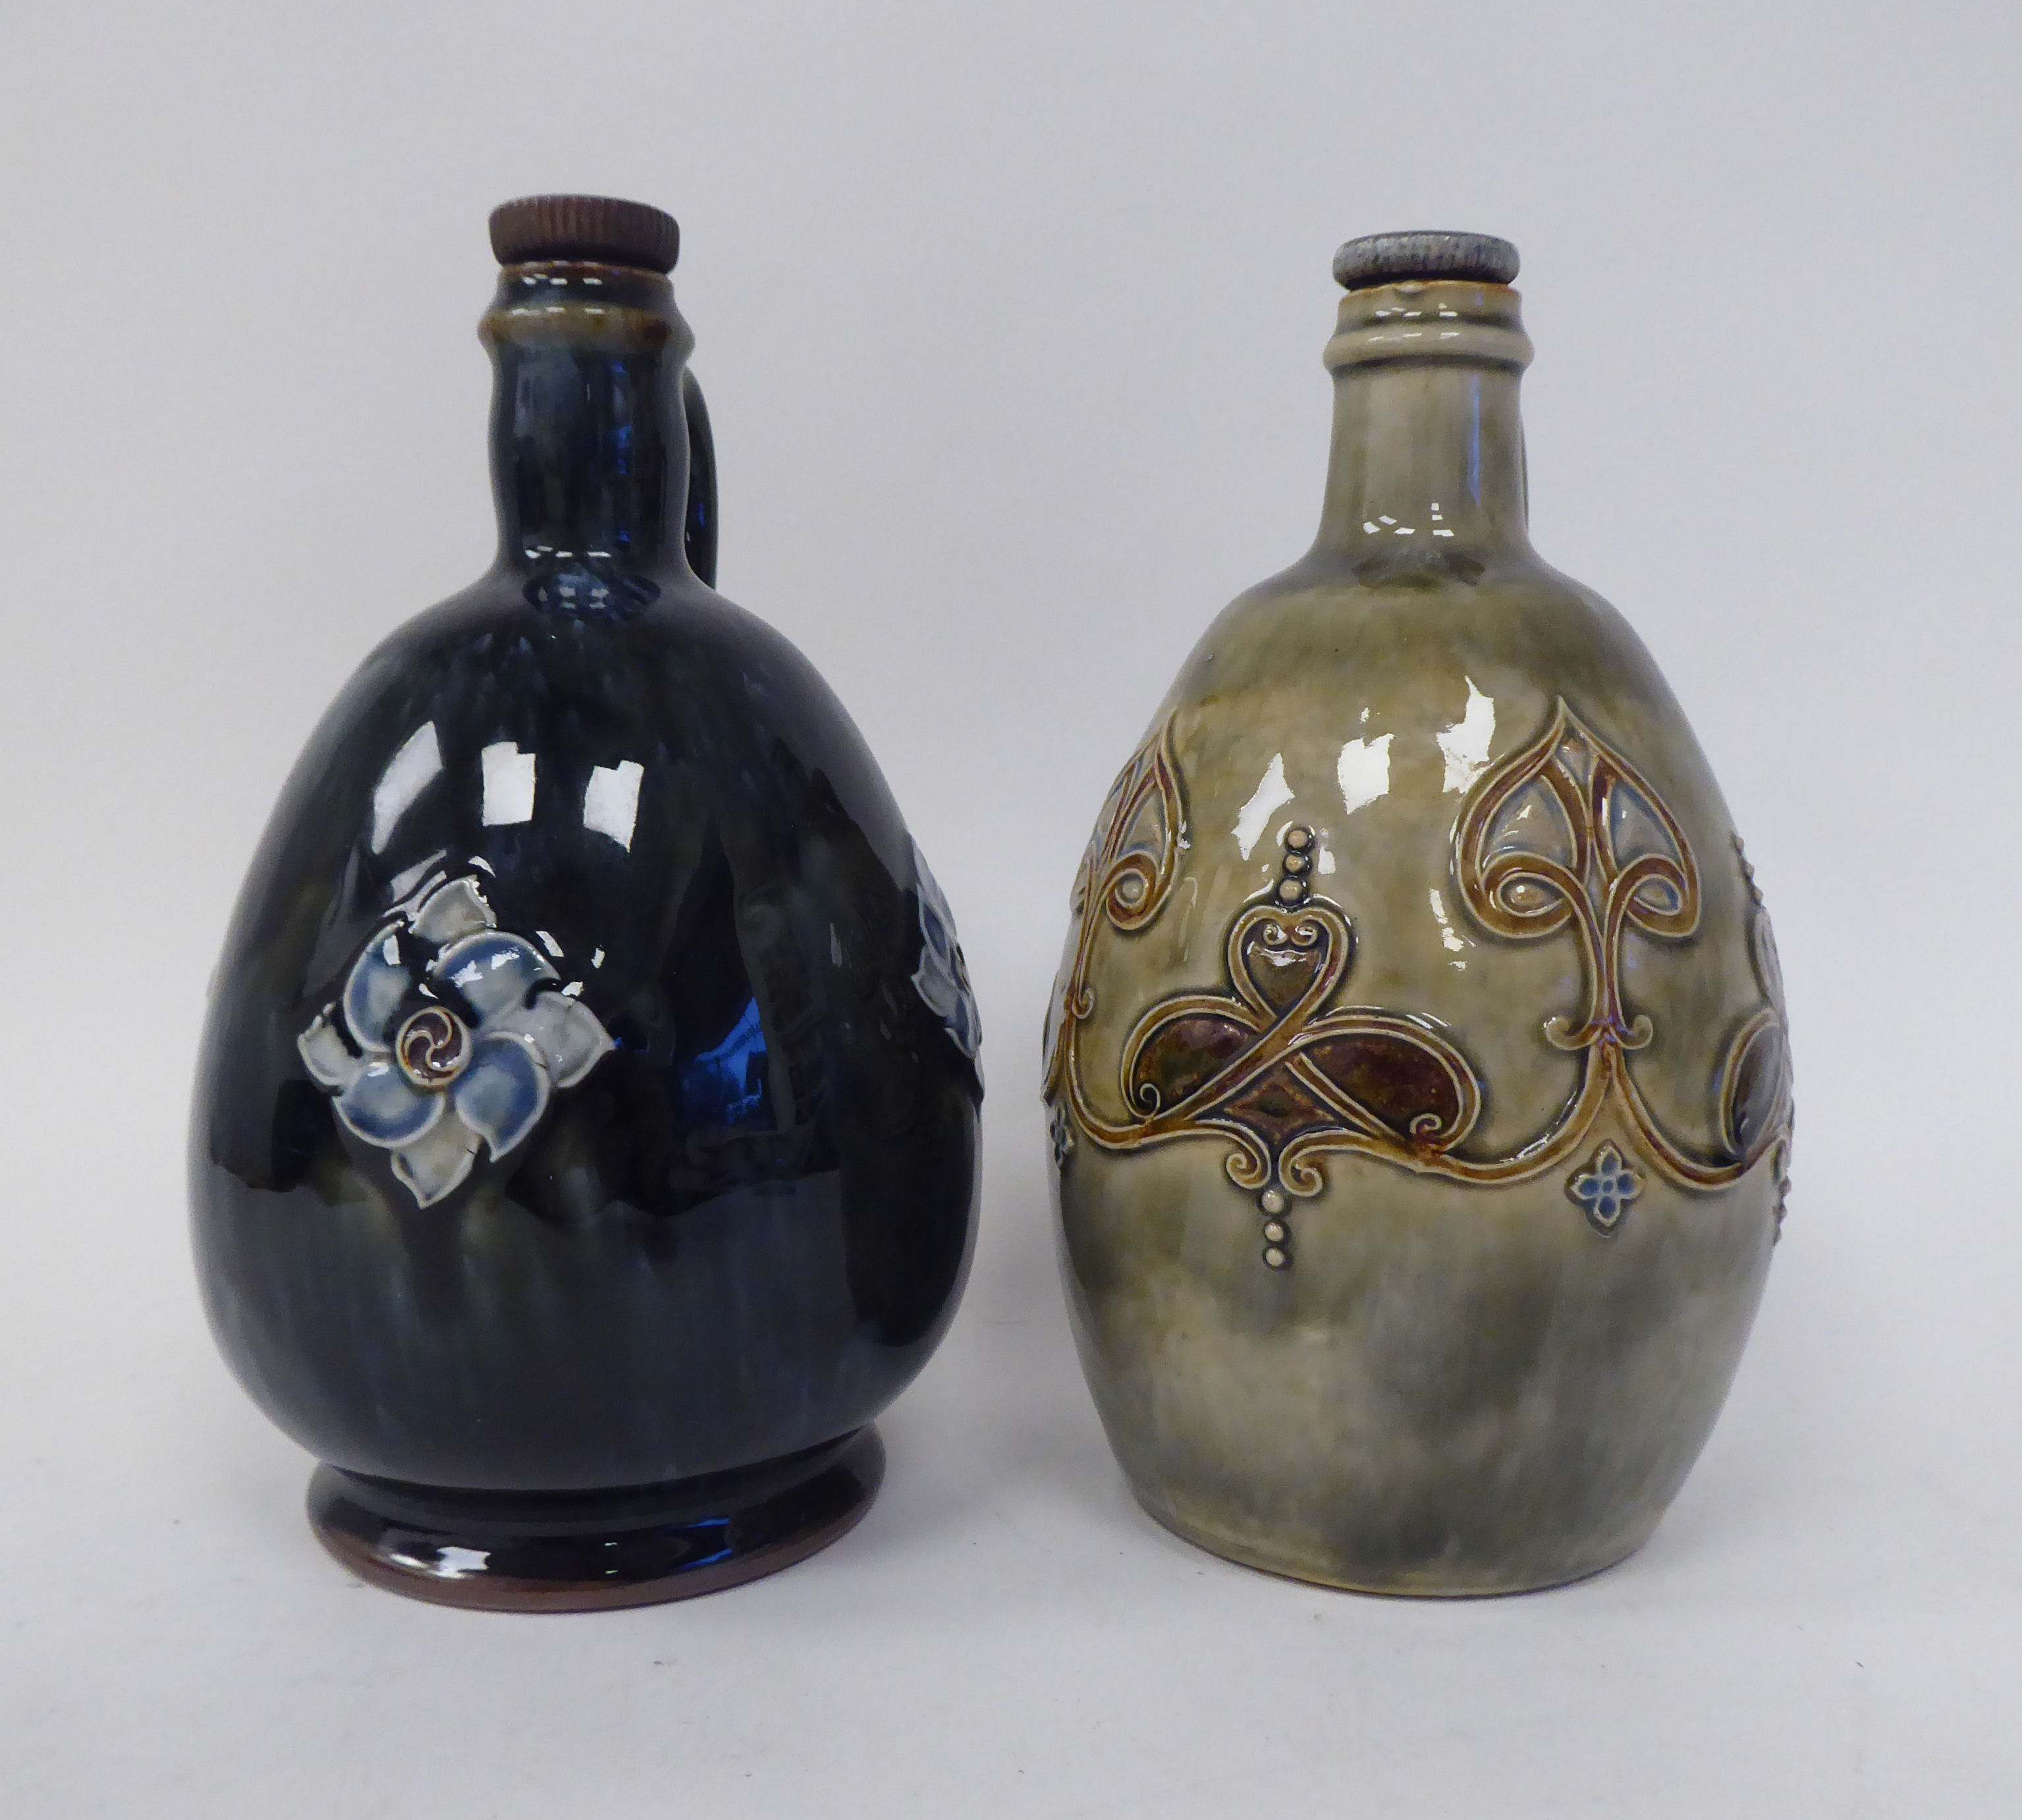 Two similar Royal Doulton stoneware ovoid shape liqueur decanters with strap handles, decorated in - Image 2 of 7